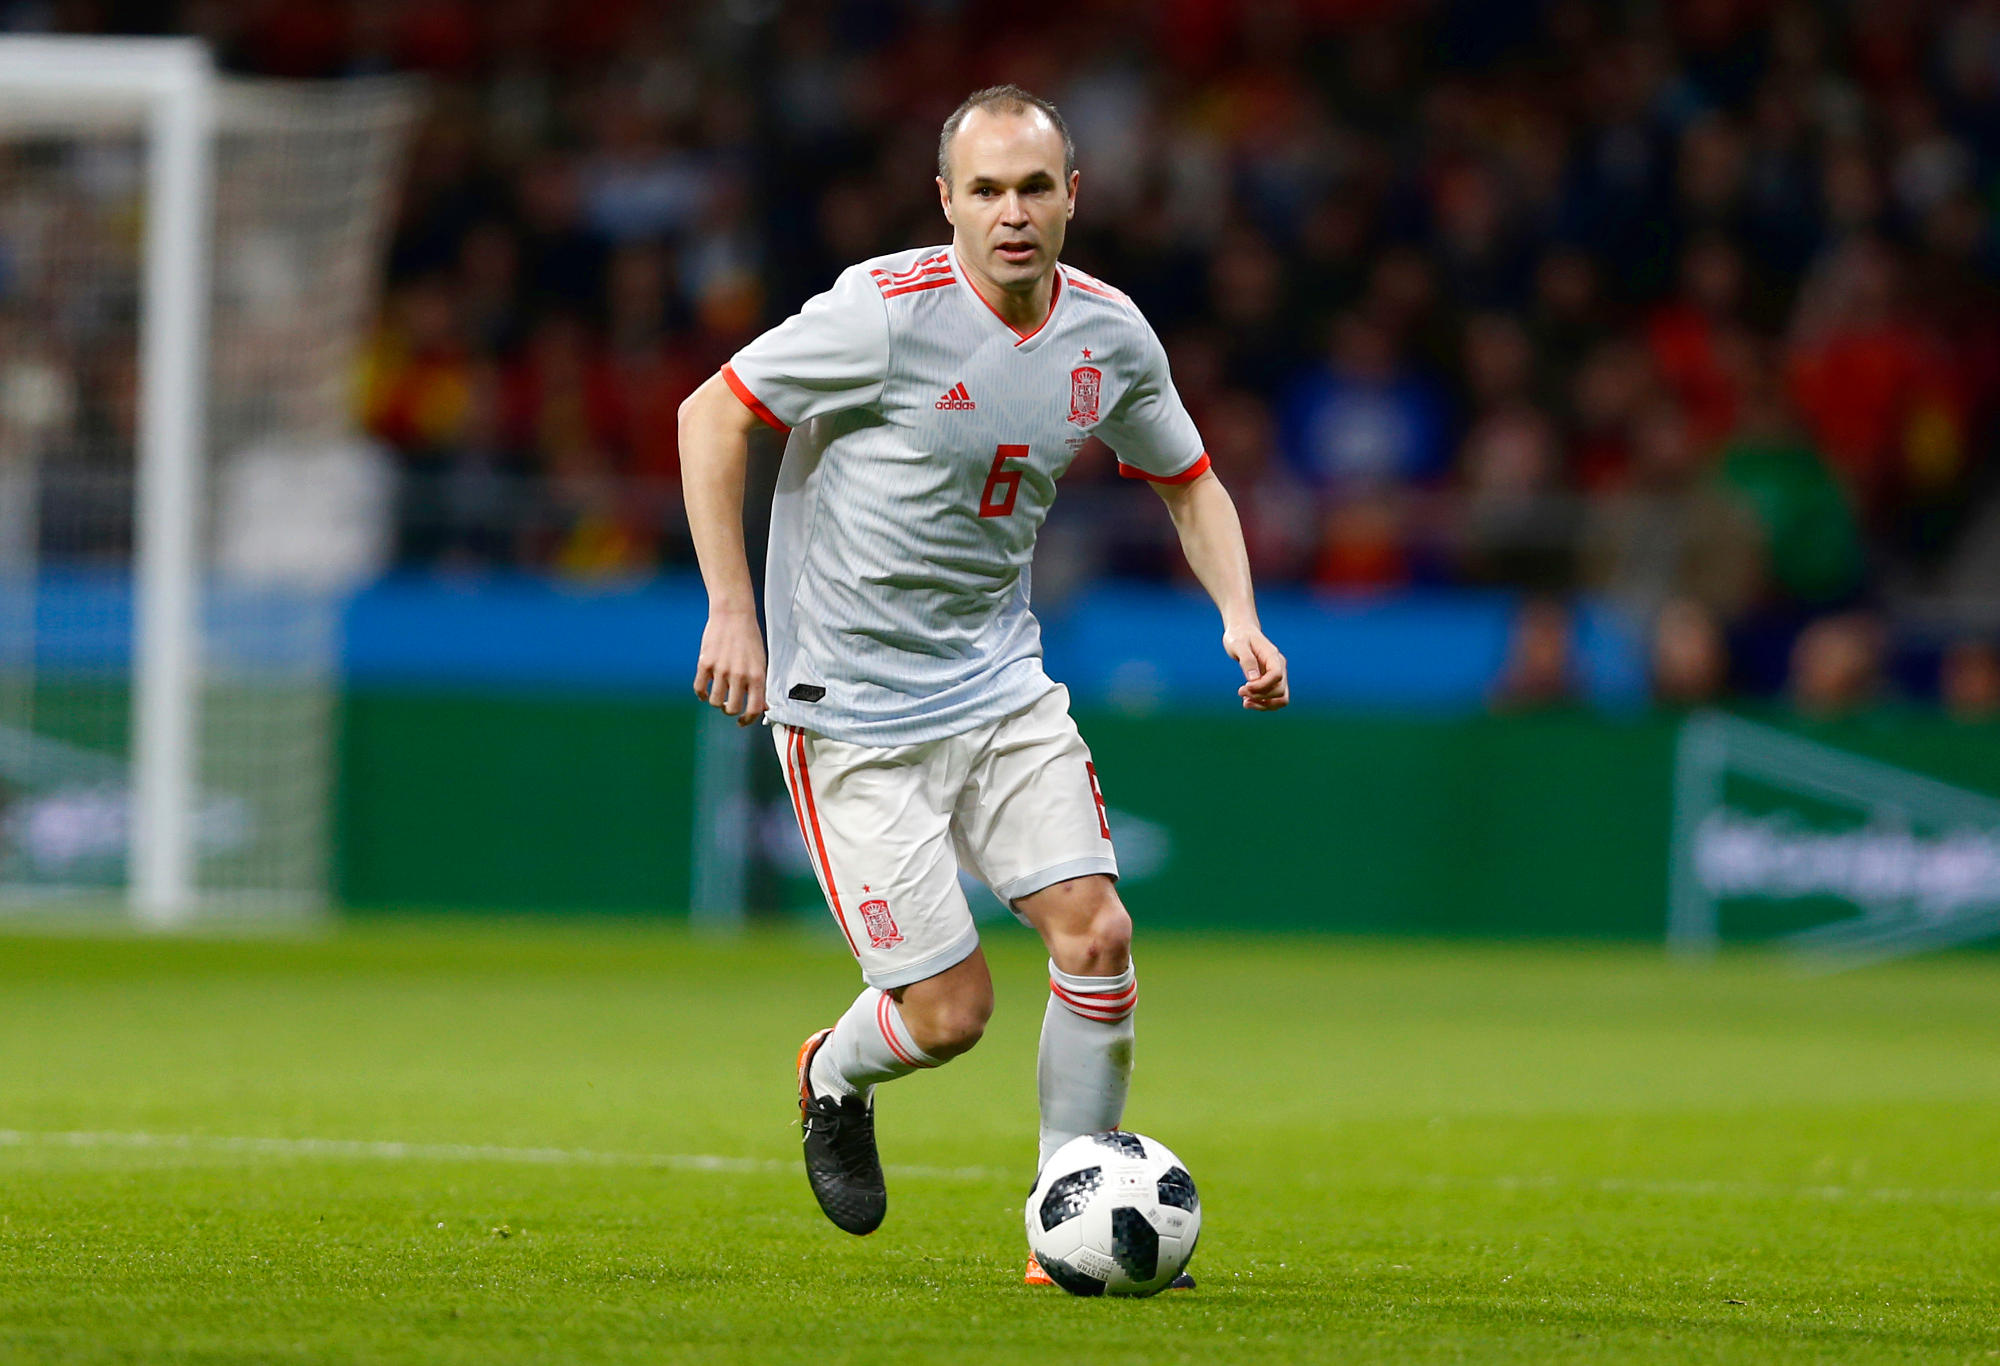 Andres Iniesta dribbles the ball for Spain